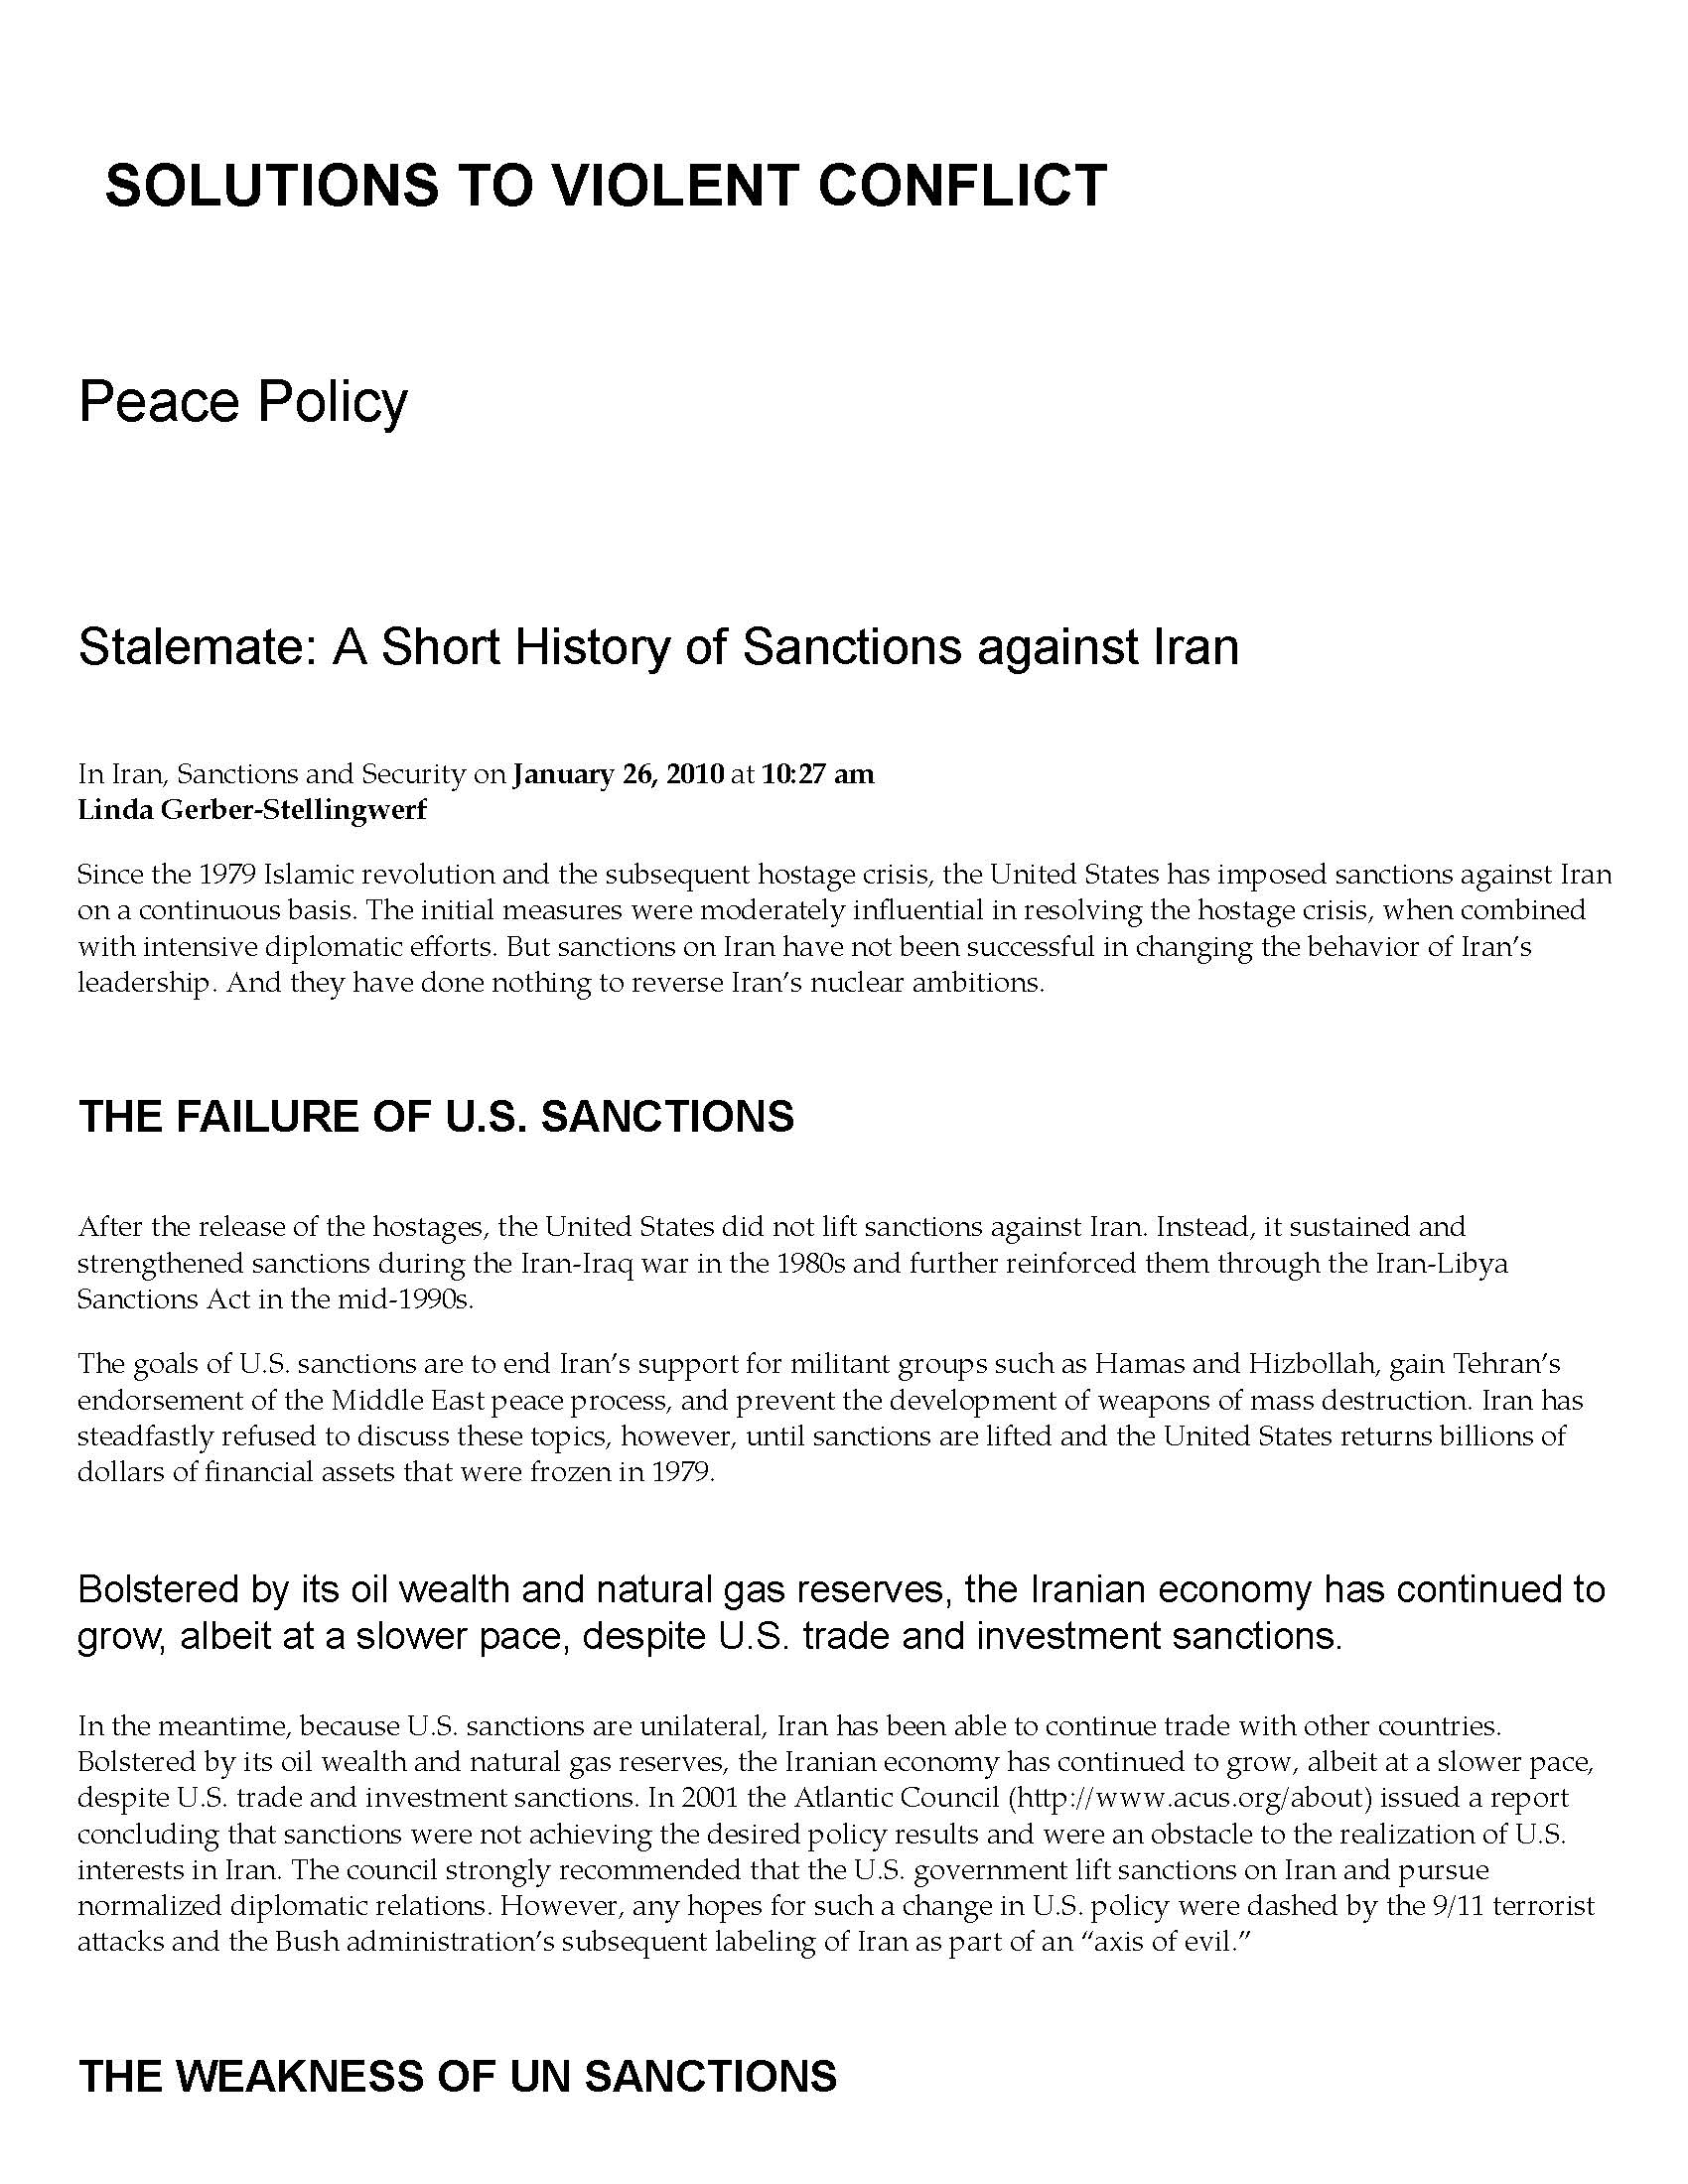 Stalemate: A Short History of Sanctions Against Iran